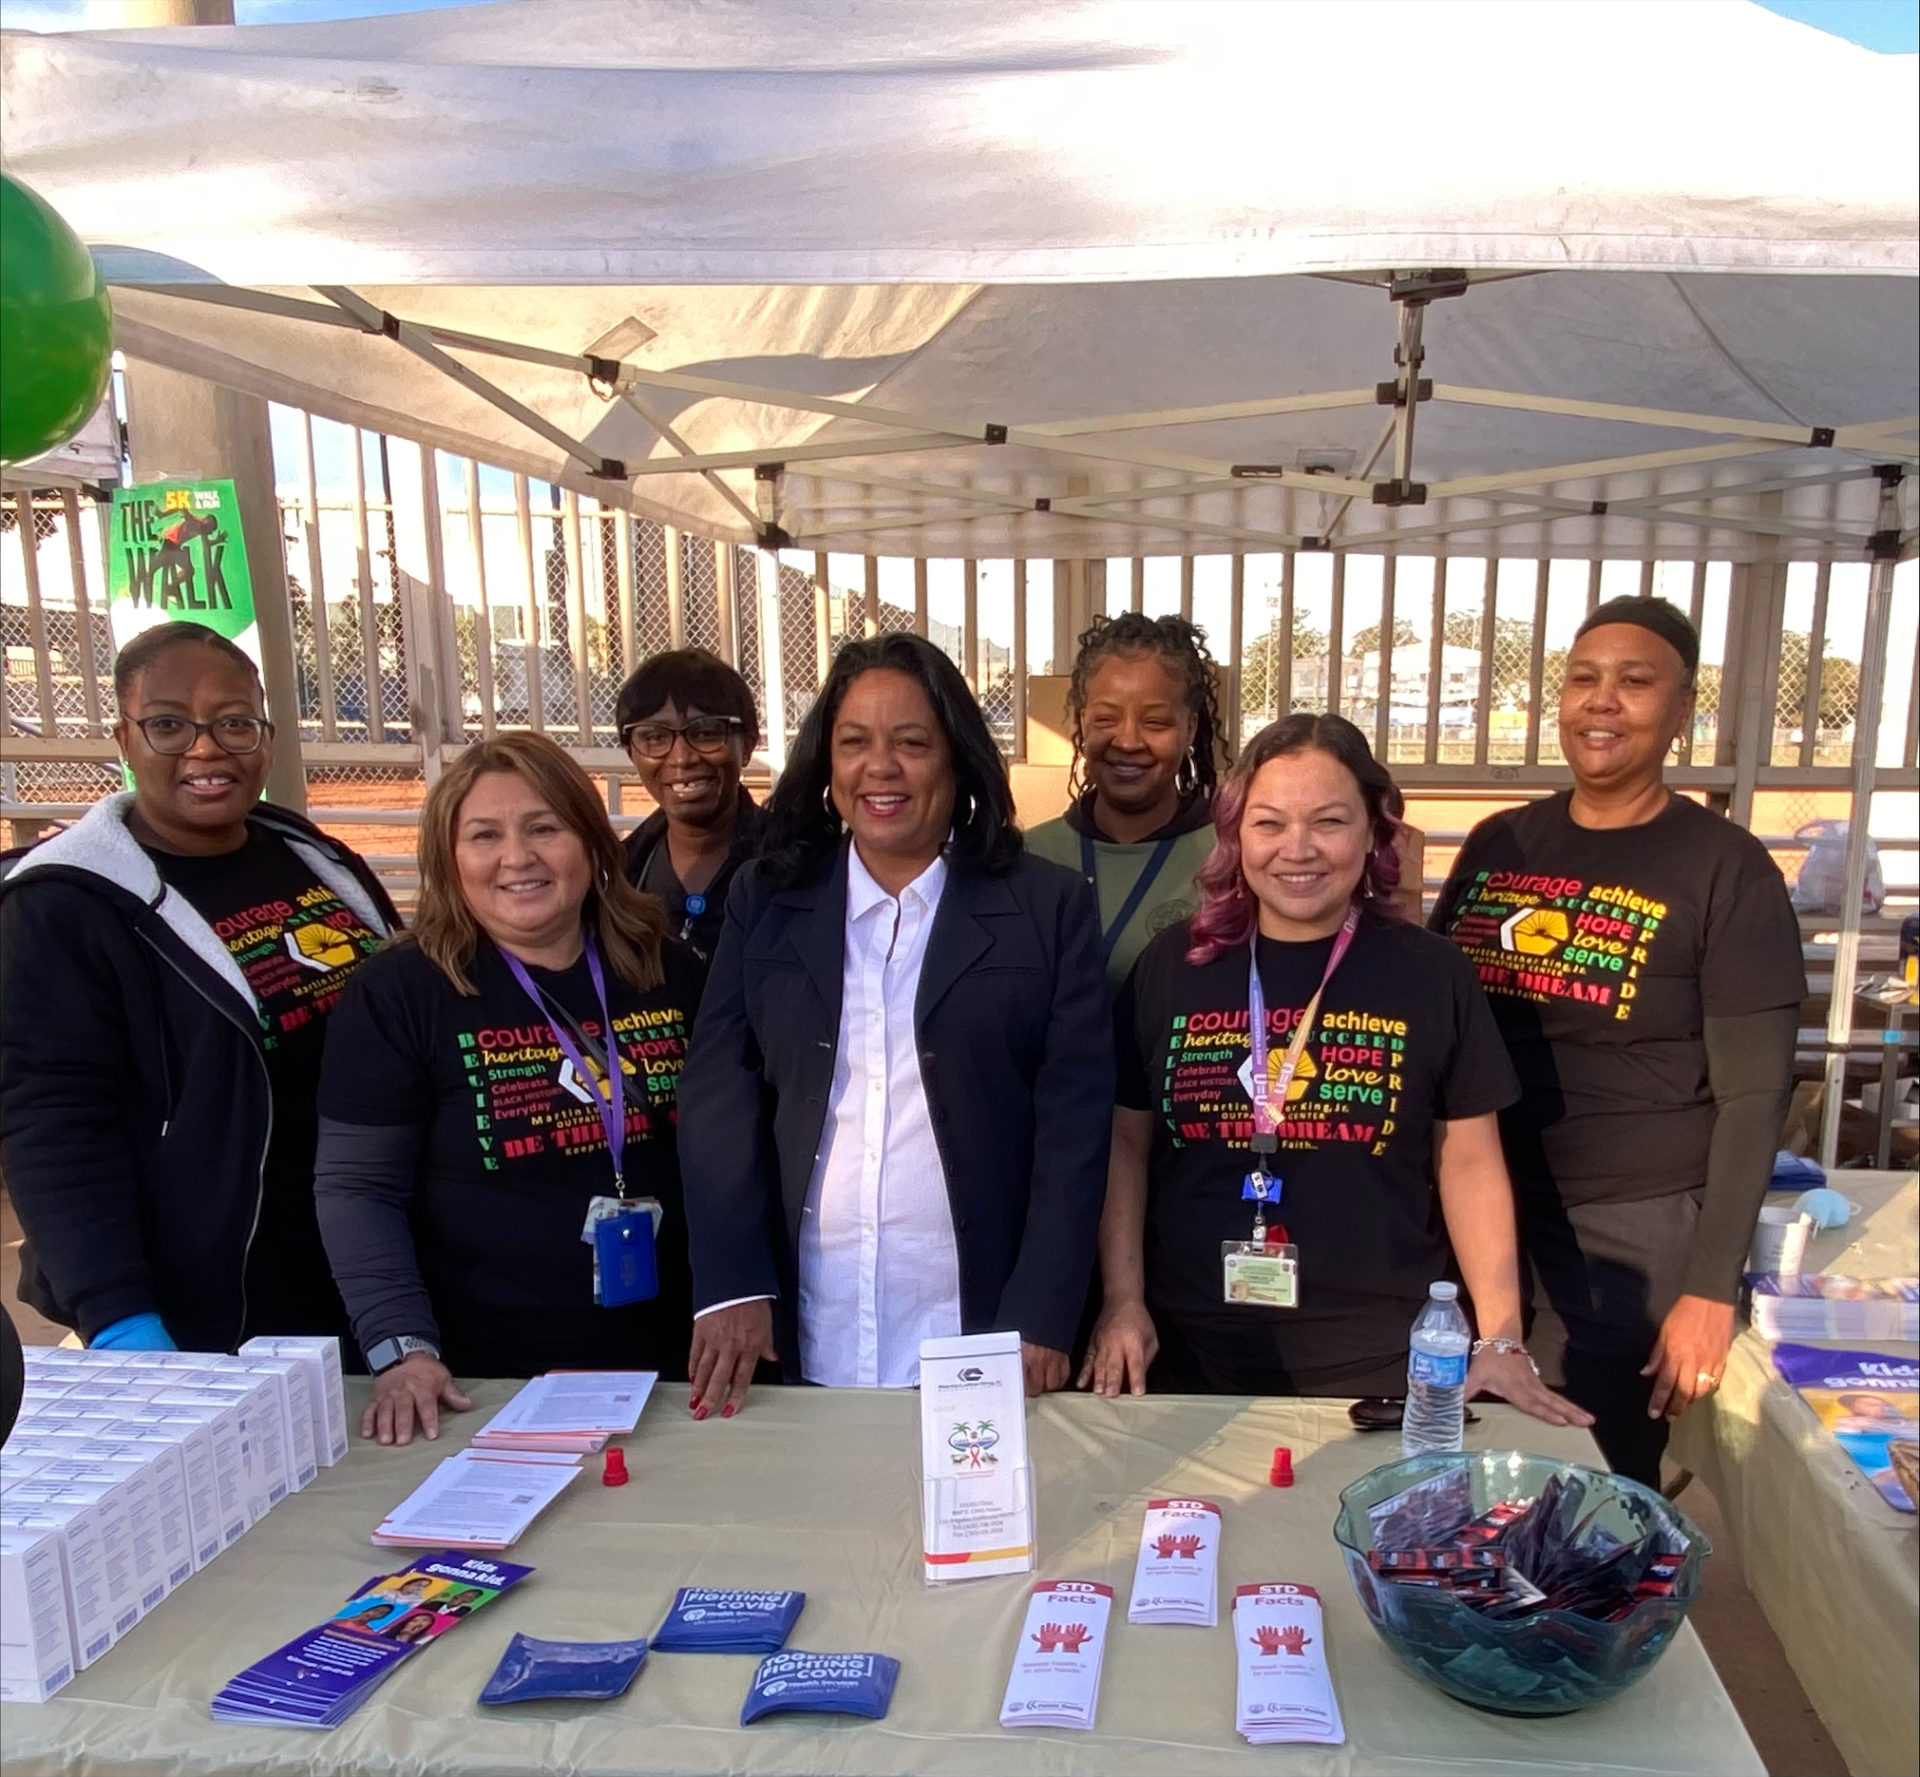 LA Services Community Outreach at the National African American Male Wellness Agency Run/Walk